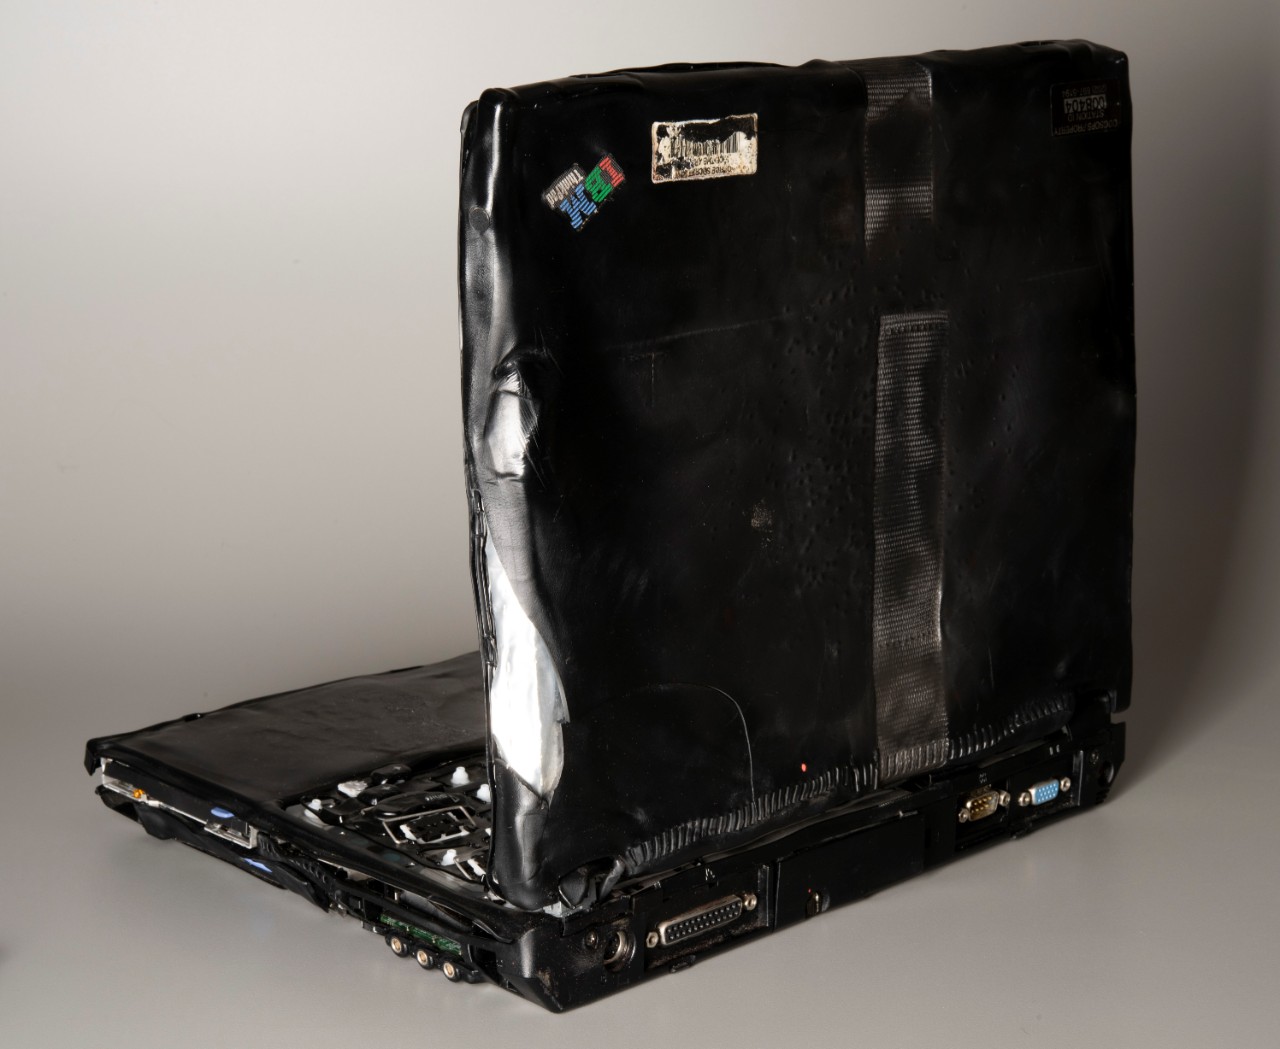 <p>Heat damage from the fire after the attack on the Pentagon caused thermoplastic components to melt, warp, and keys to separate from the base of the laptop. Additionally, heat formed an impression of a security strap on the exterior of the laptop and cracked the screen.</p>